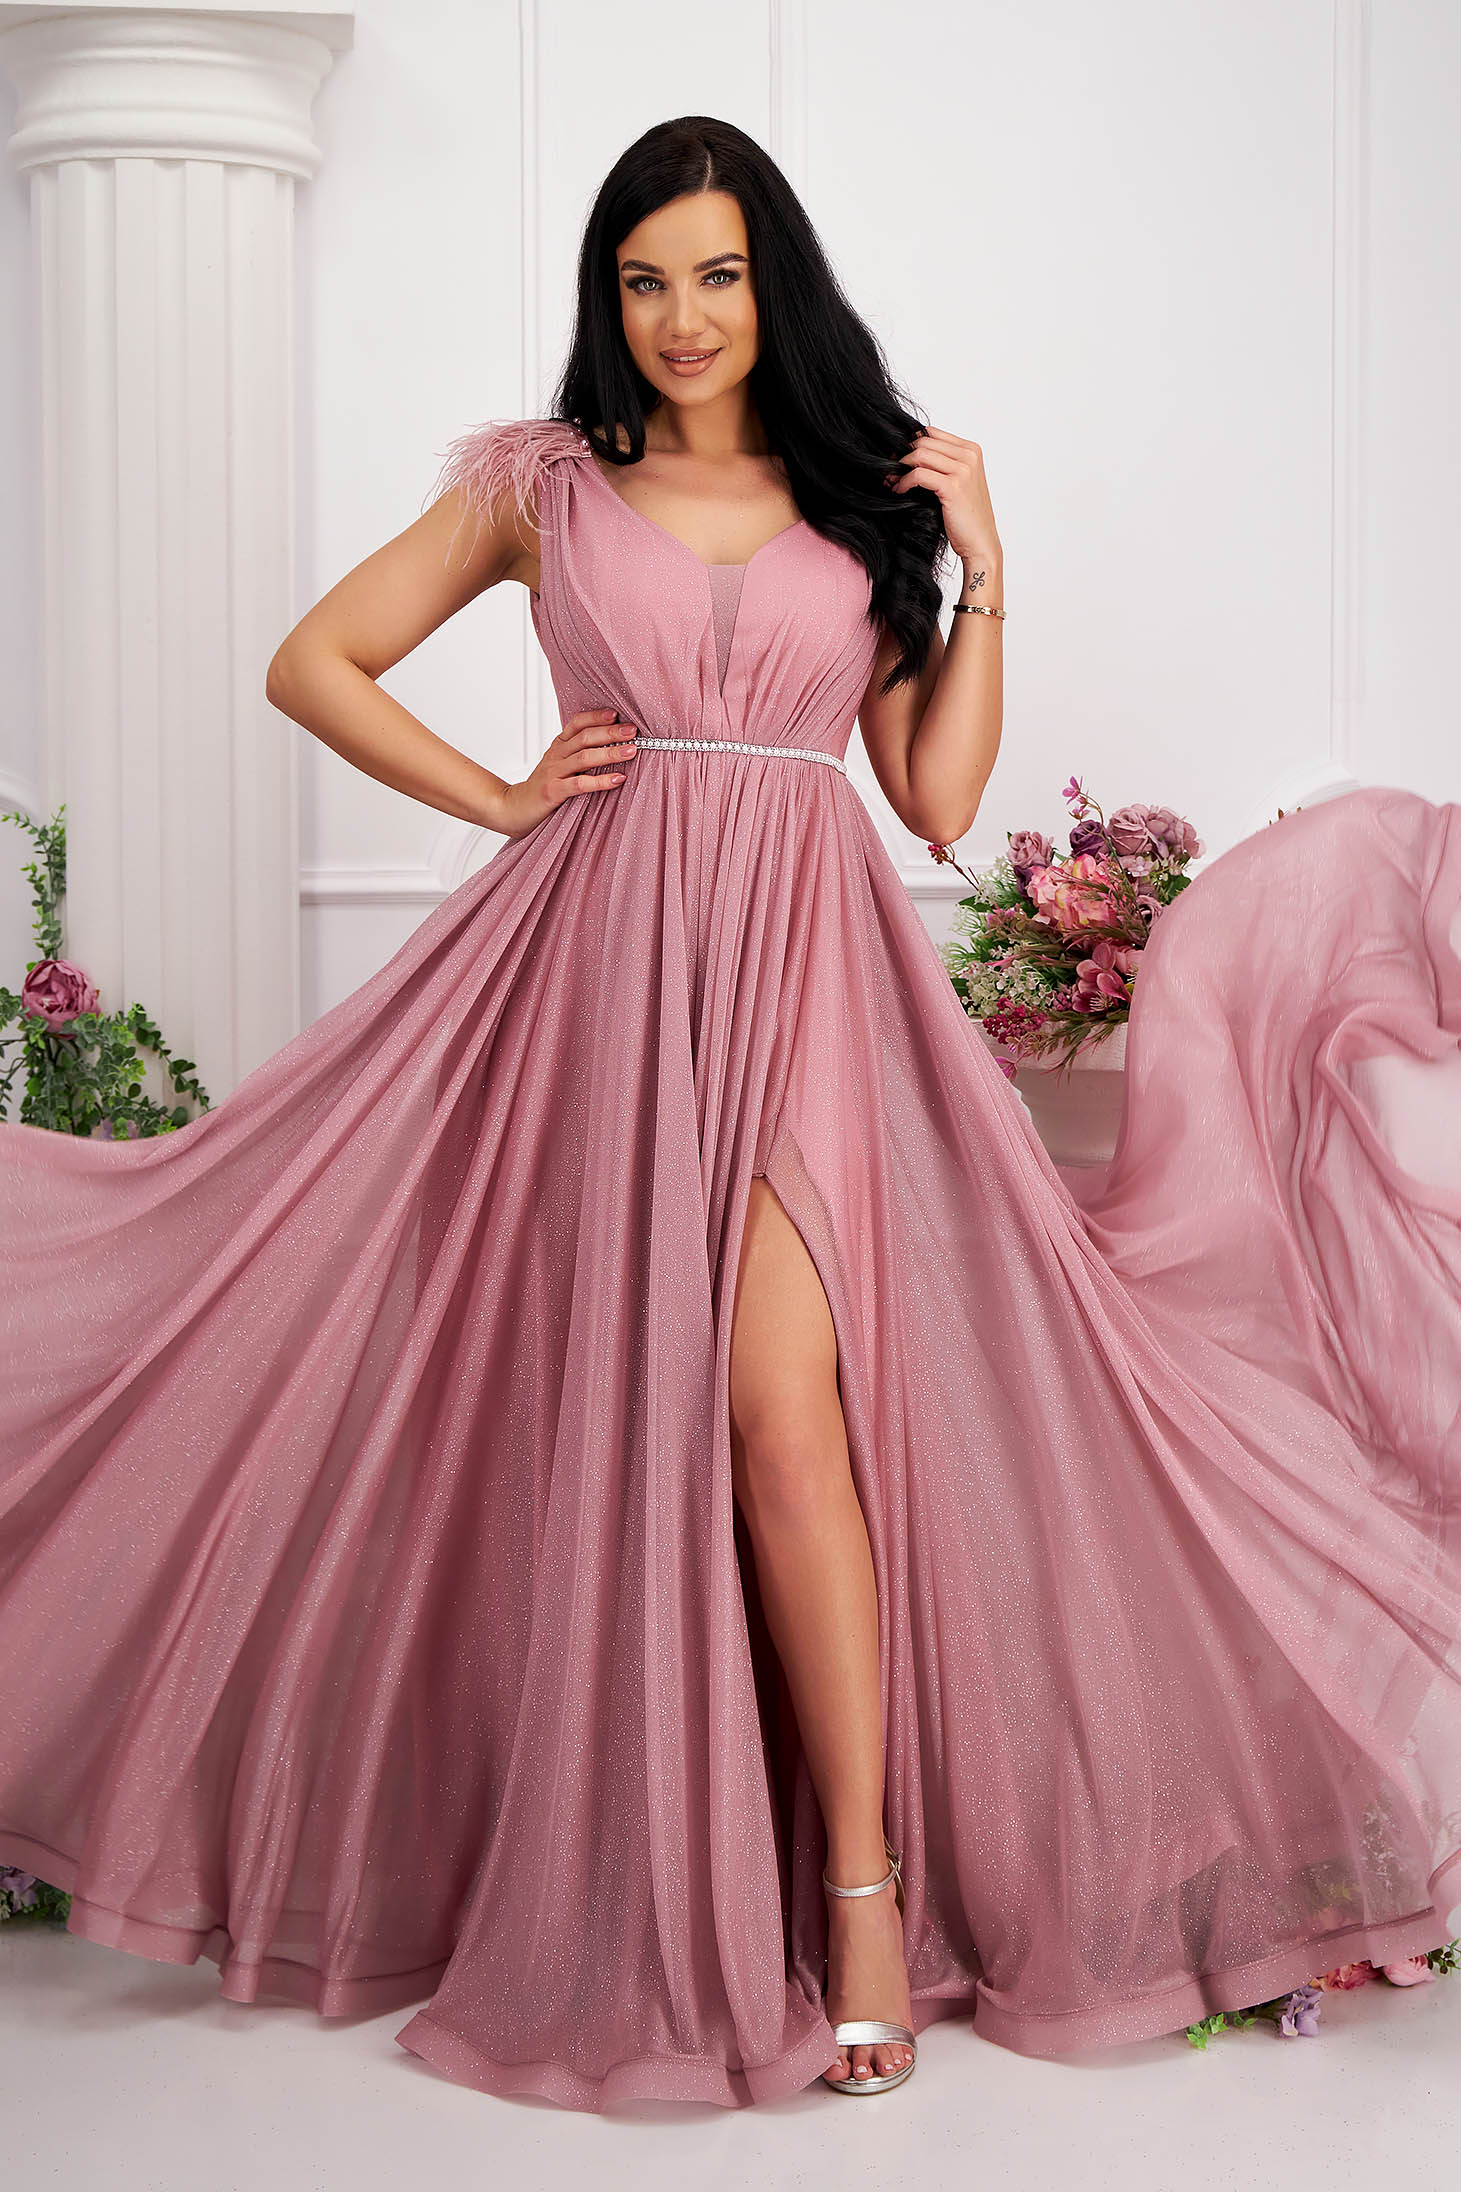 Lightpink dress from tulle with glitter details long cloche feather details